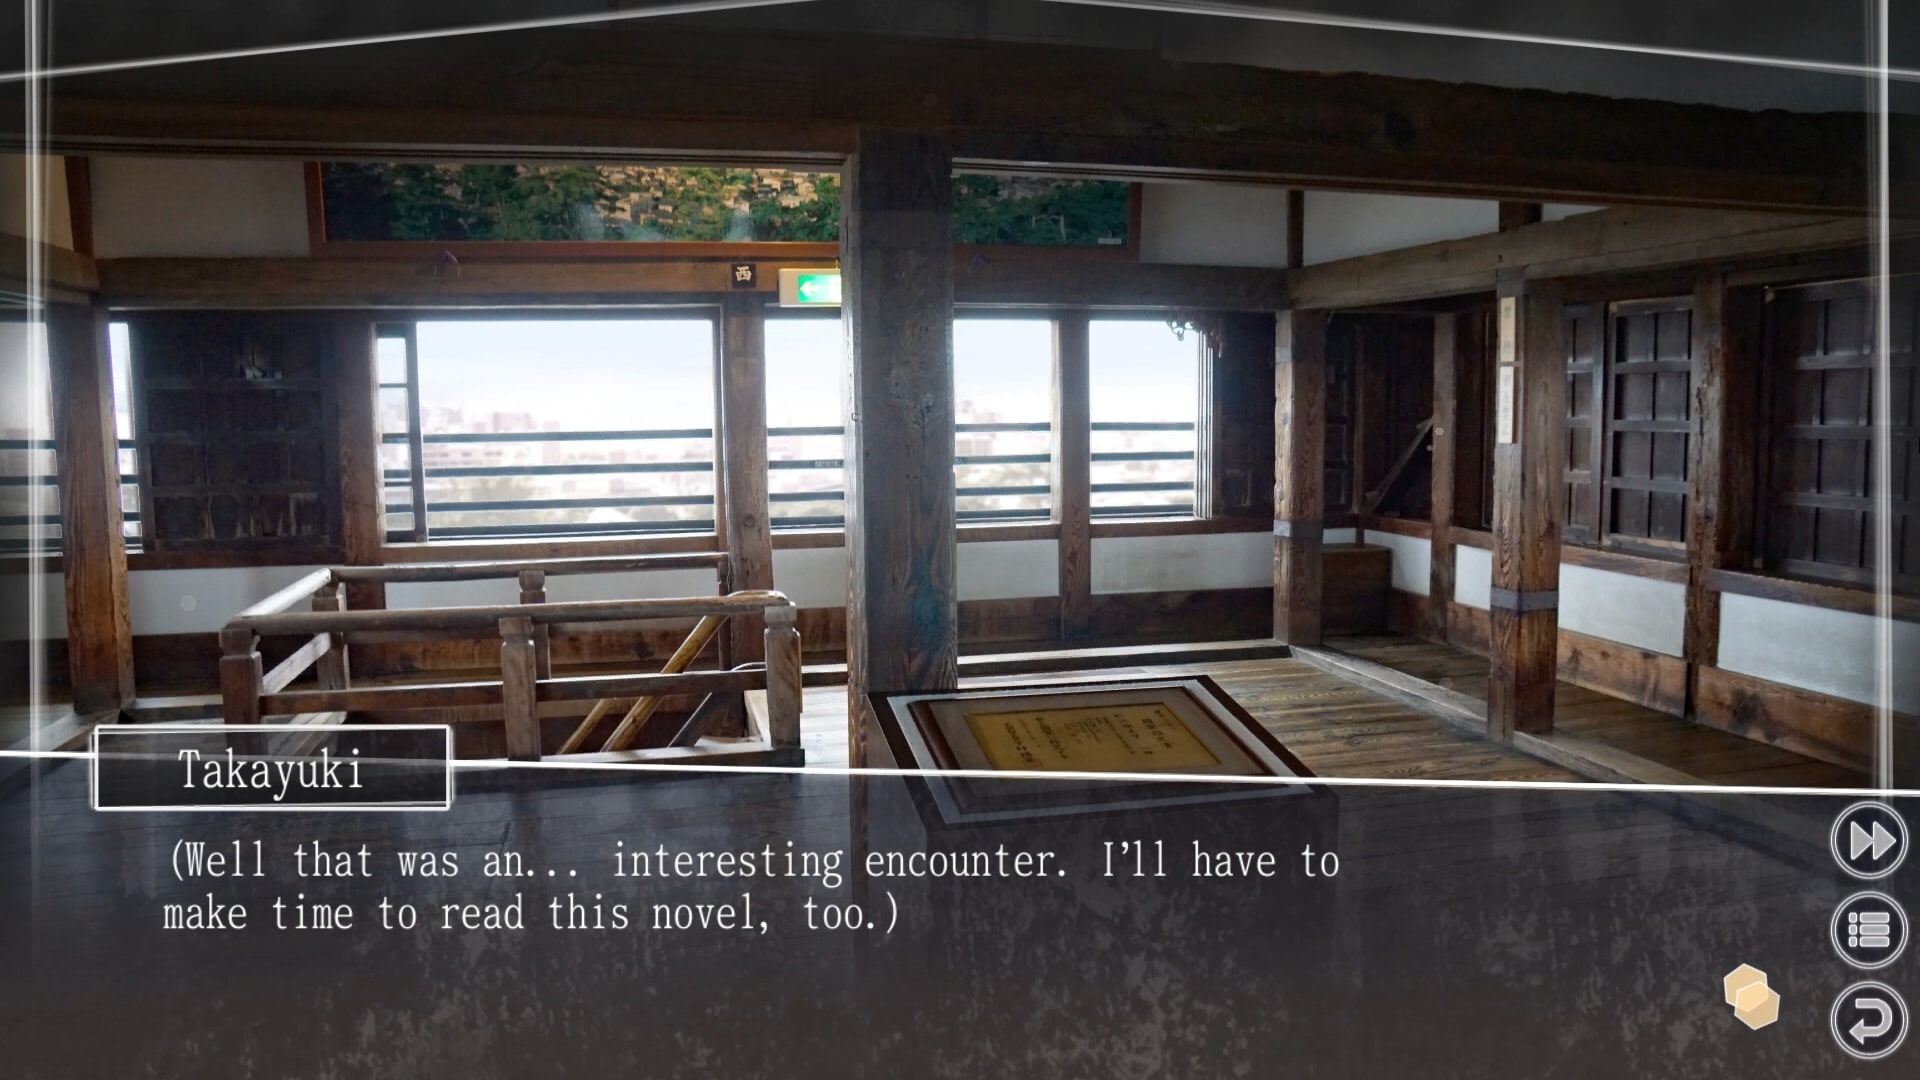 Root Letter Last Answer Additional Scenarios for Root Letter Last Answer Walkthrough - Scenario 1: Wandering Traveler - FBED755